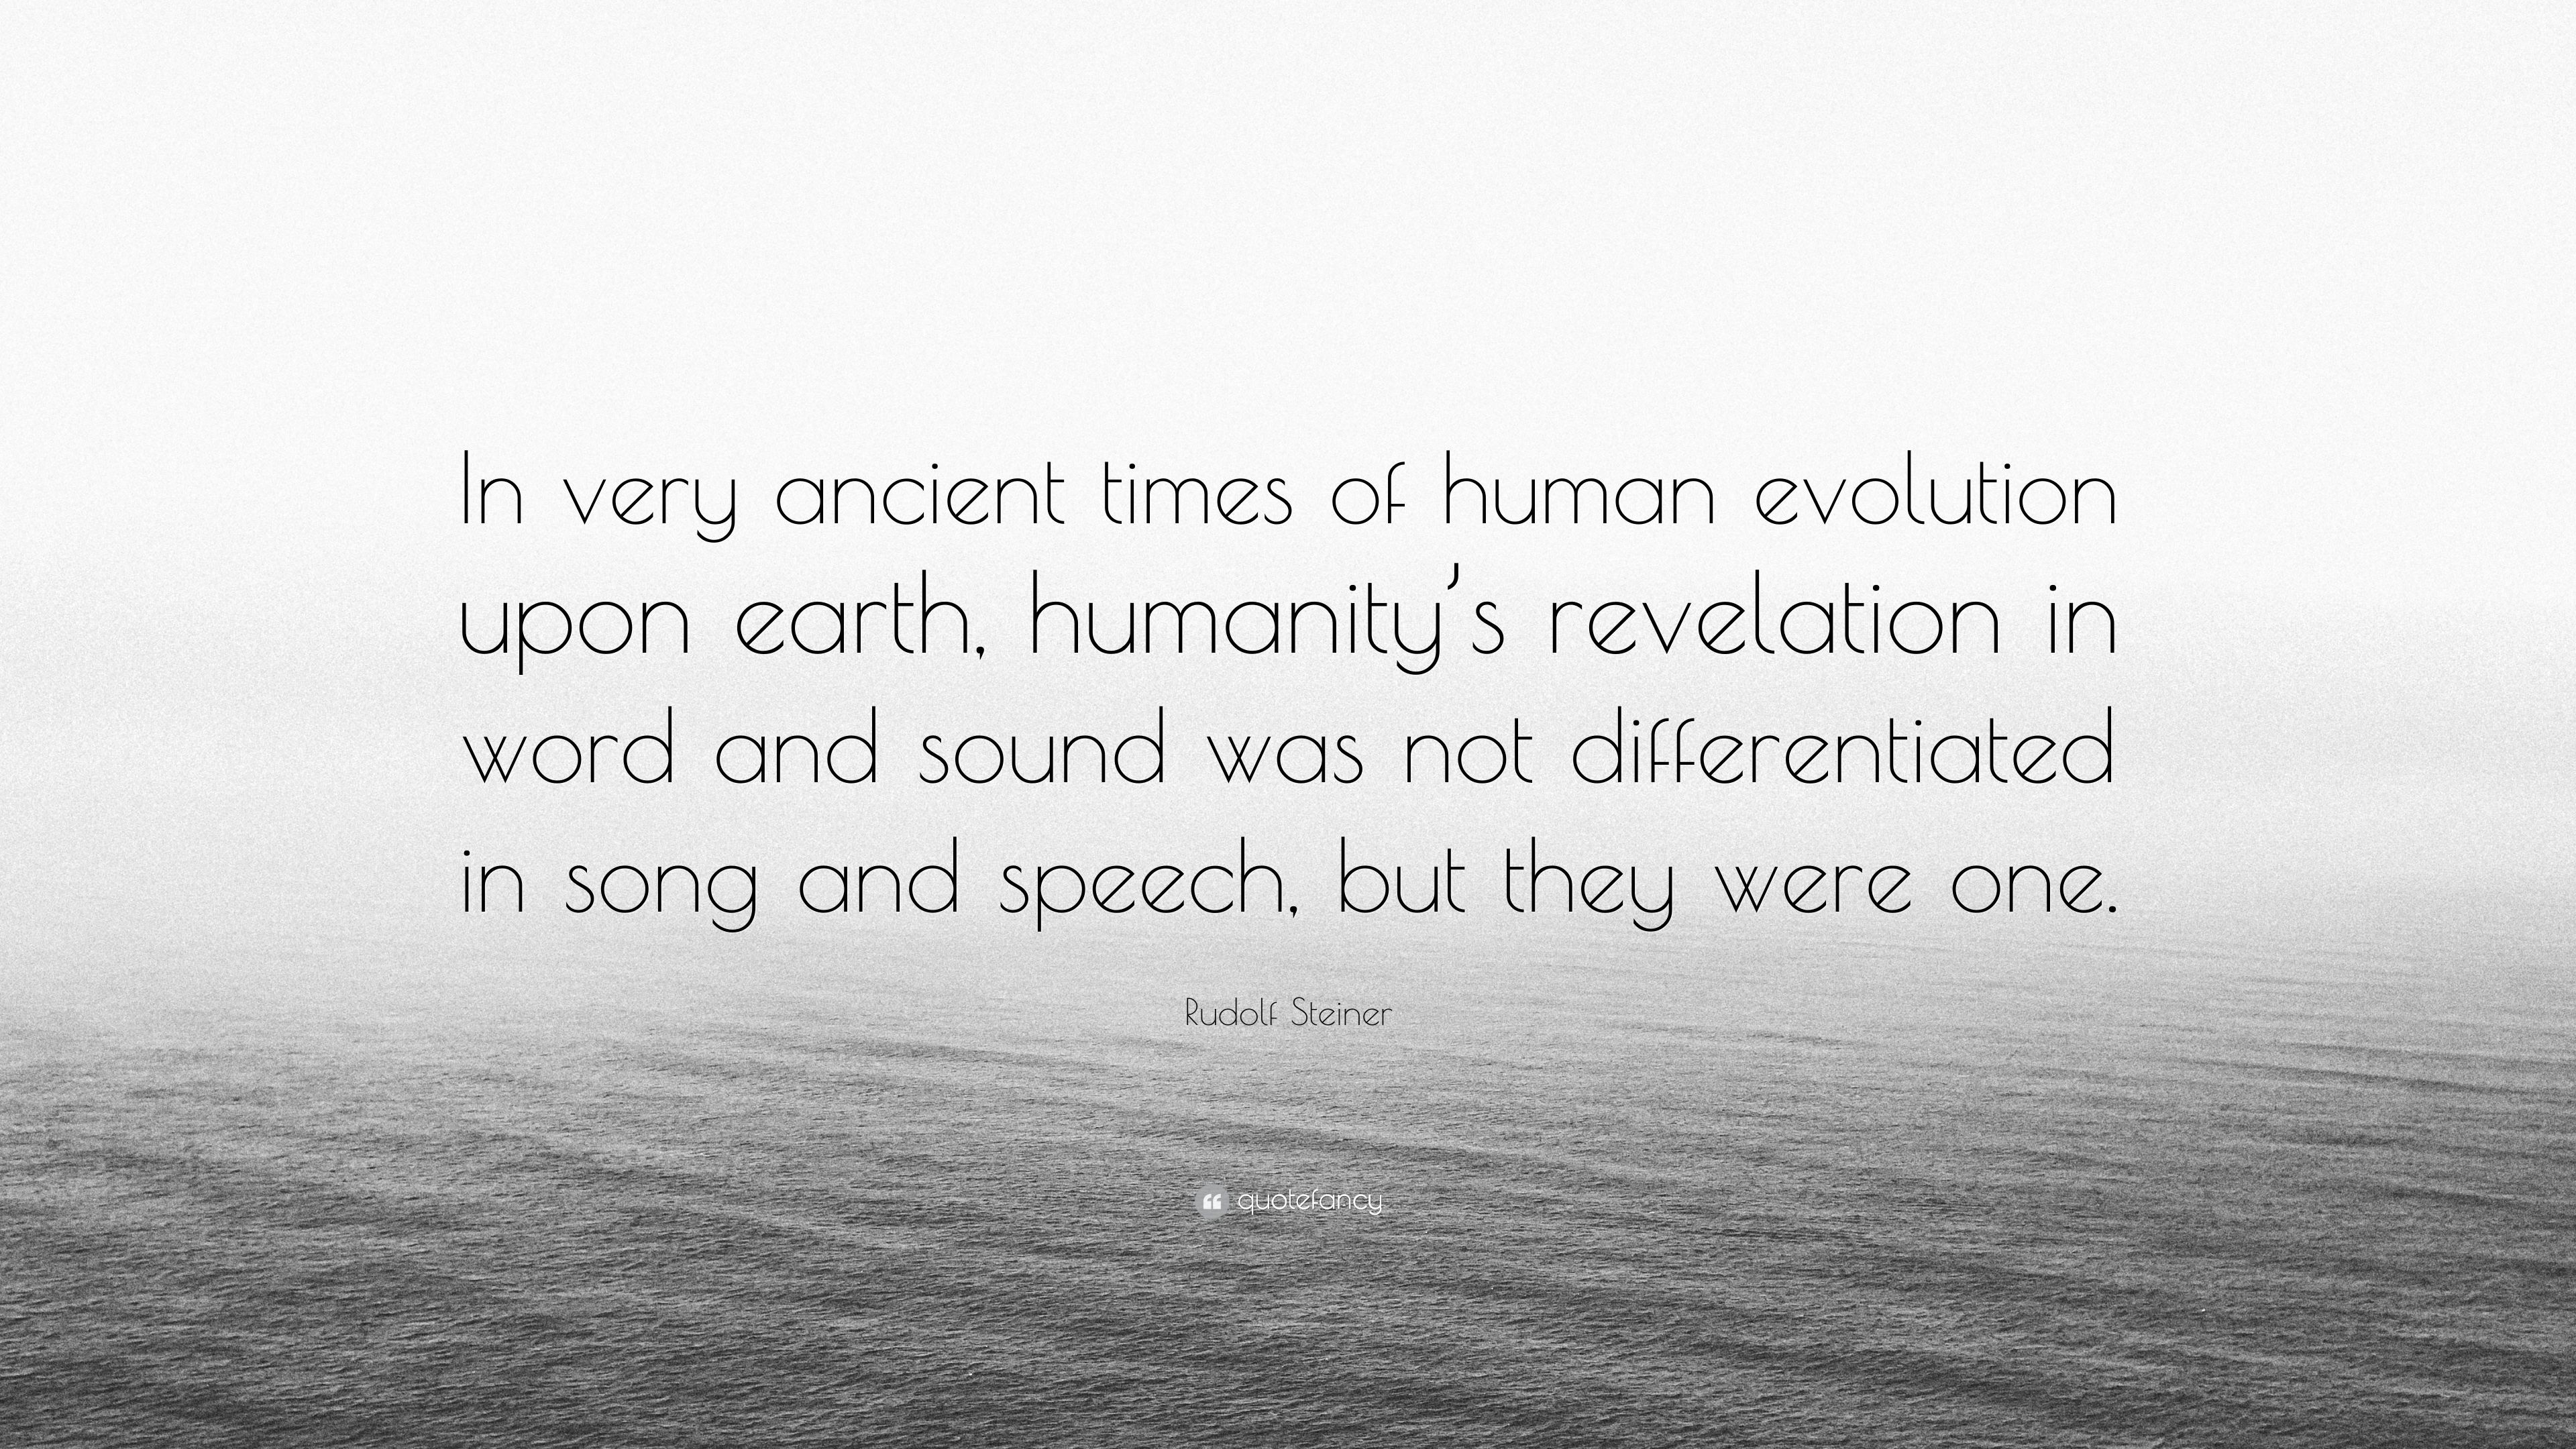 Rudolf Steiner Quote: “In very ancient times of human evolution